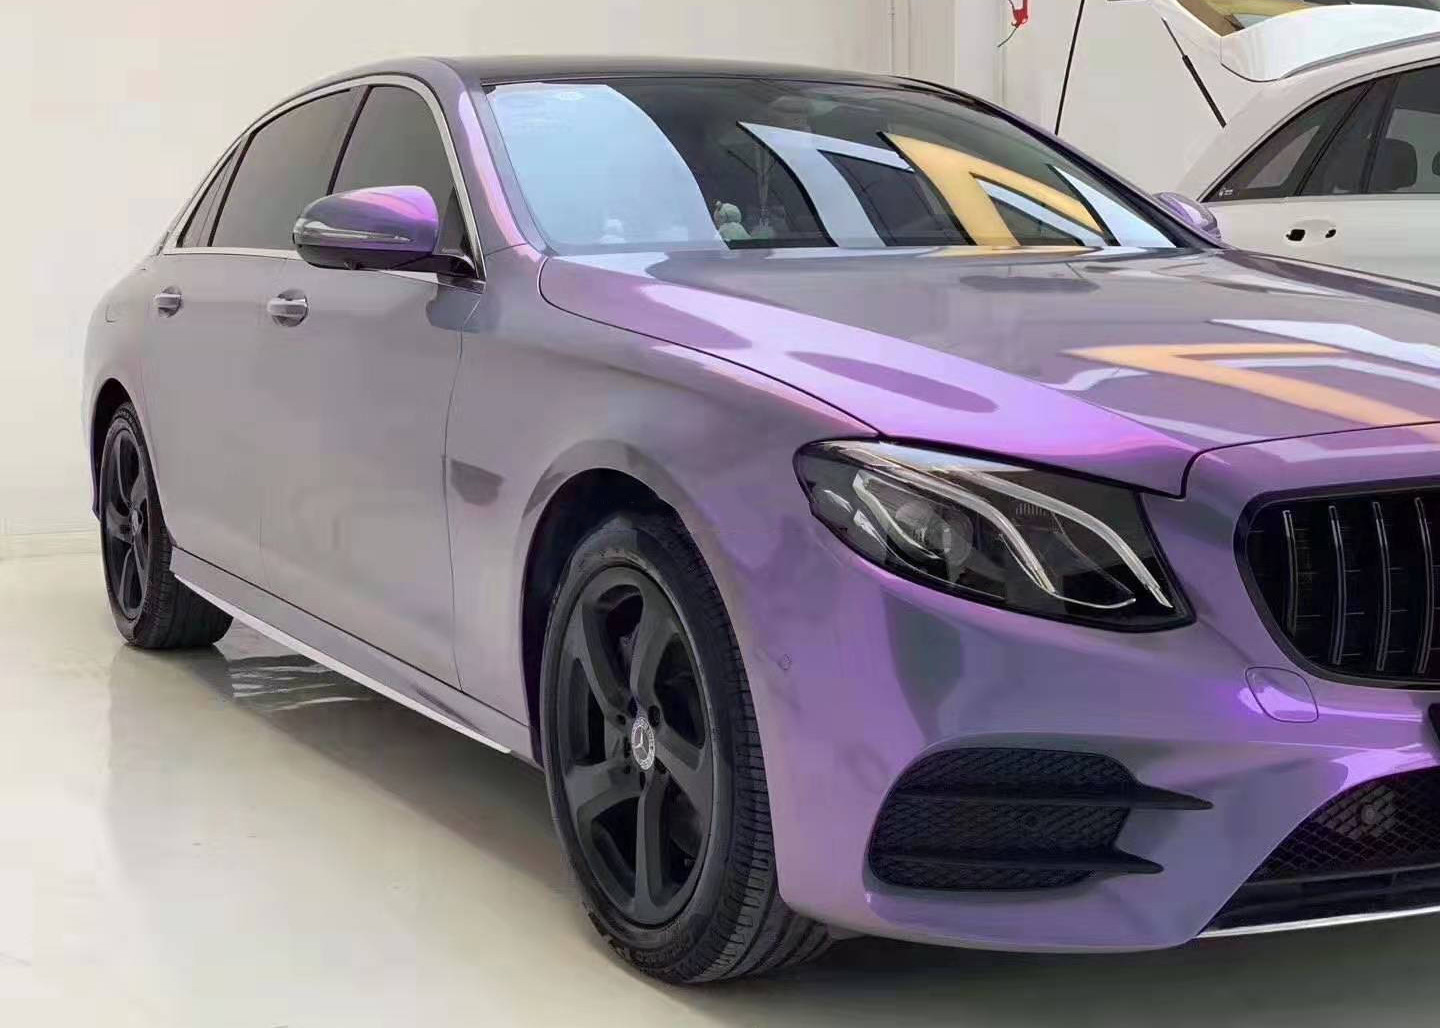 Twin Candy Grey To Purple Color Shifting Vinyl Wrap Phantom Magic 13KG / Roll Car Wrapping Sticker2